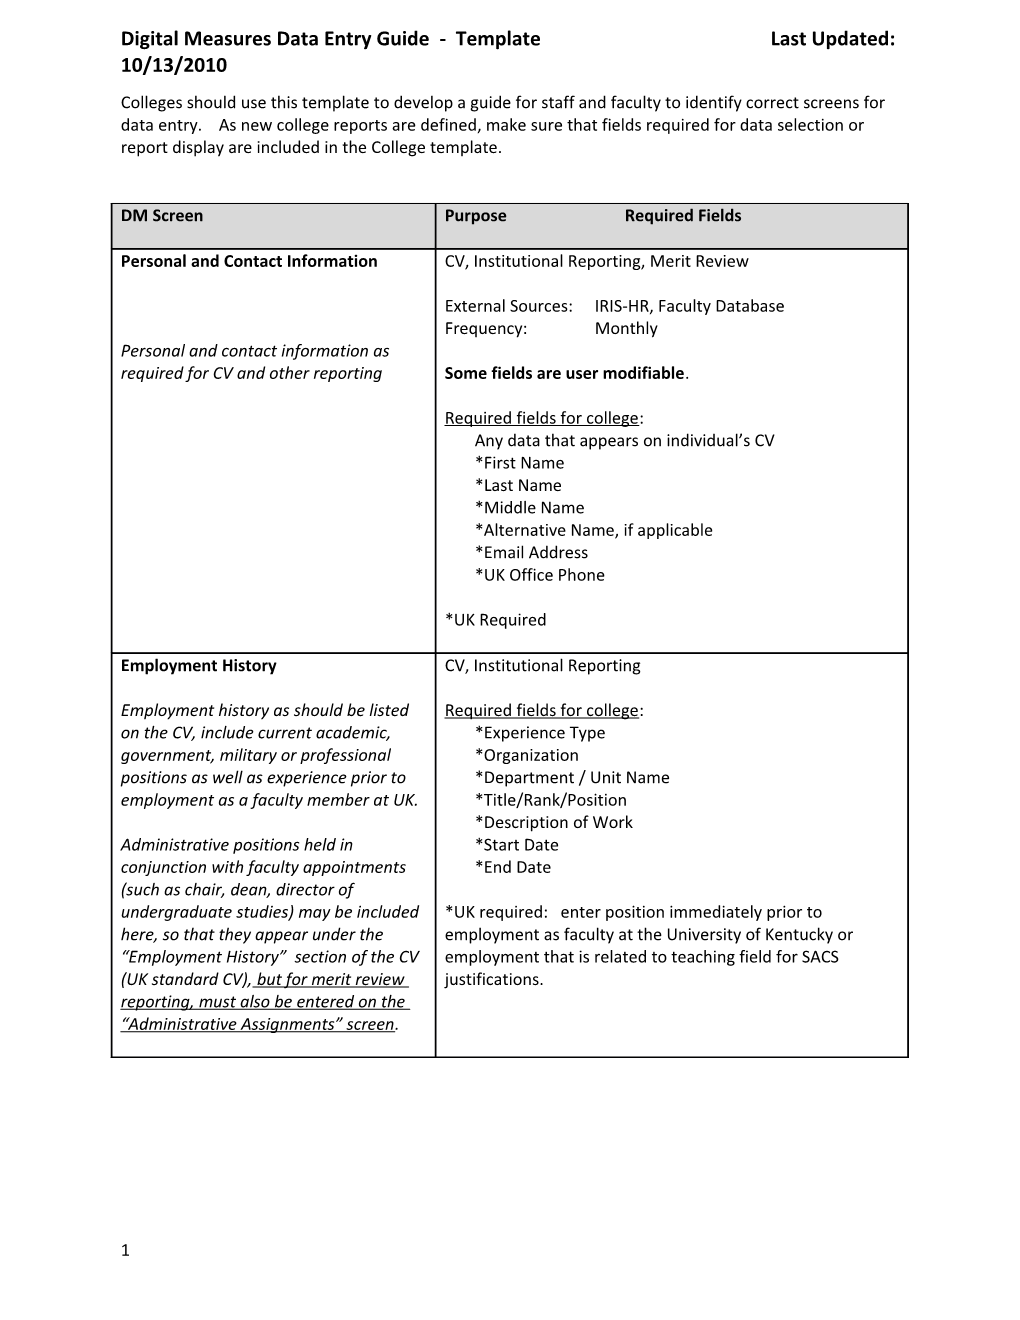 Colleges Should Use This Template to Develop a Guide for Staff and Faculty to Identify